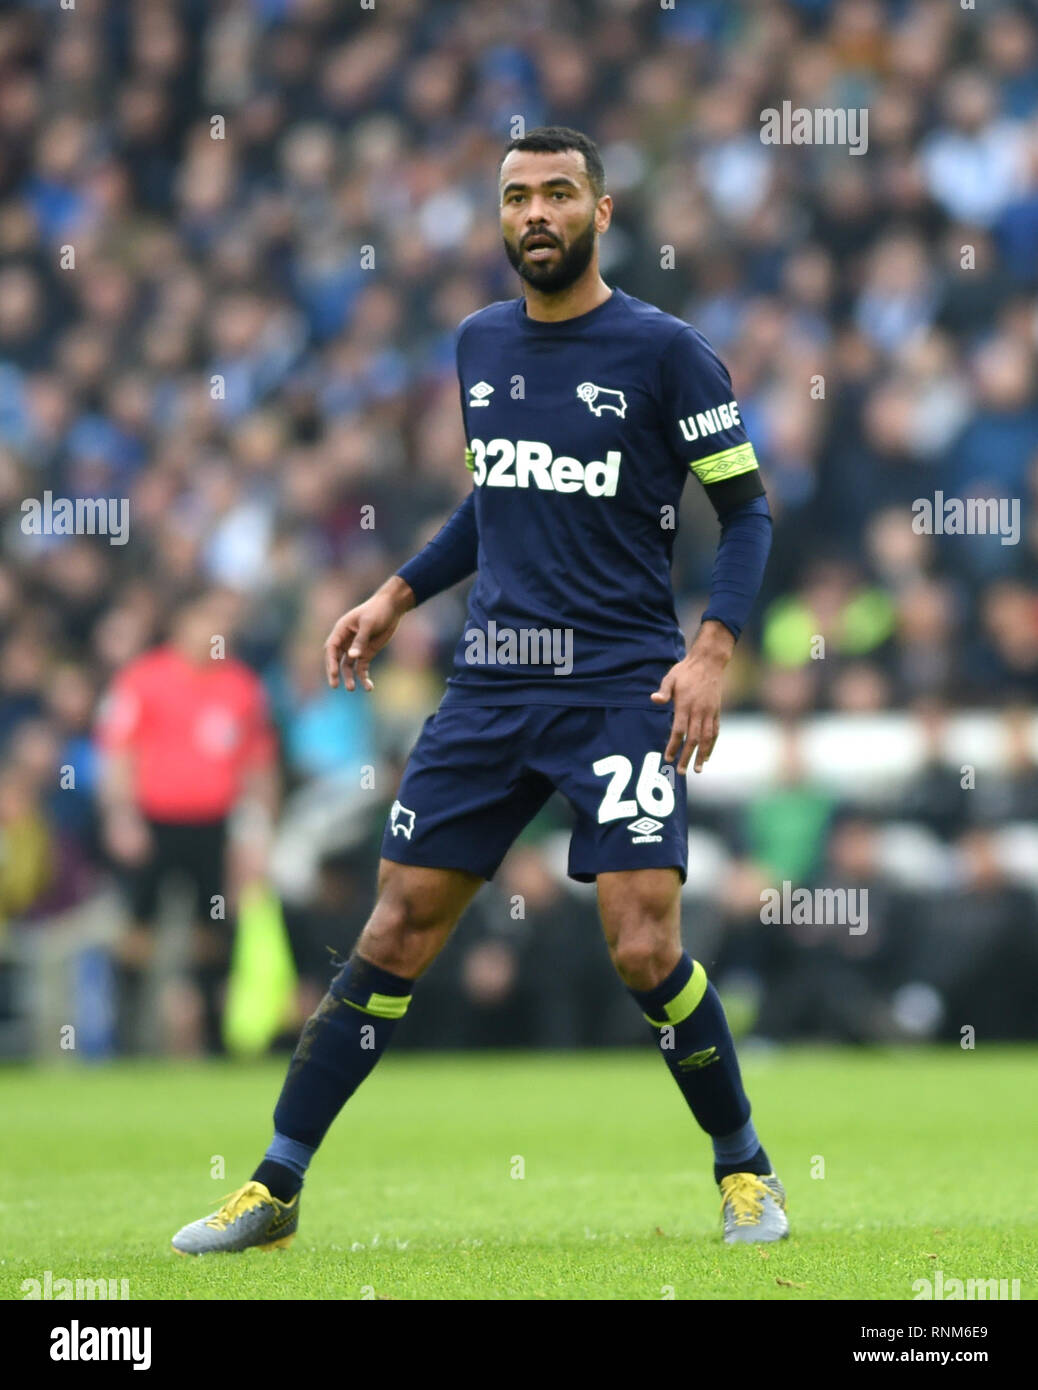 Ashley Cole of Derby during the FA Cup 5th round match between Brighton & Hove Albion and Derby County at the American Express Community Stadium . 16 February 2019 Editorial use only. No merchandising. For Football images FA and Premier League restrictions apply inc. no internet/mobile usage without FAPL license - for details contact Football Dataco Stock Photo